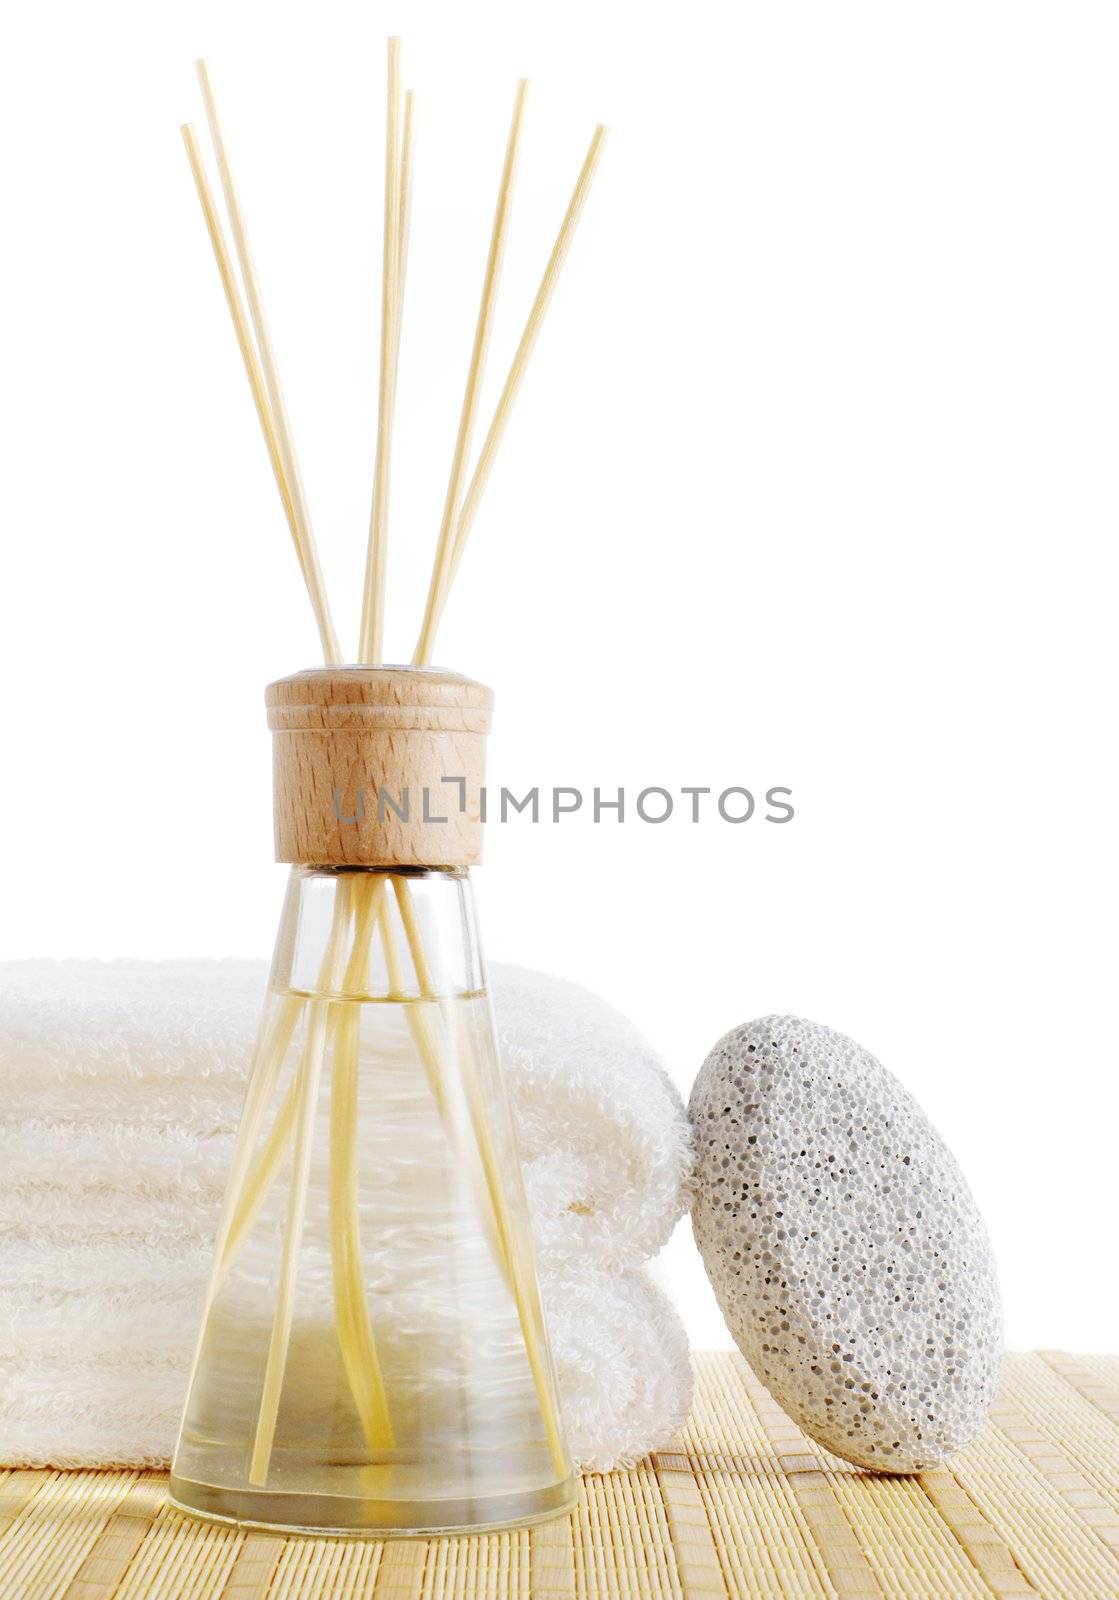 Diffuser, towels, and pumice stone against a white background.